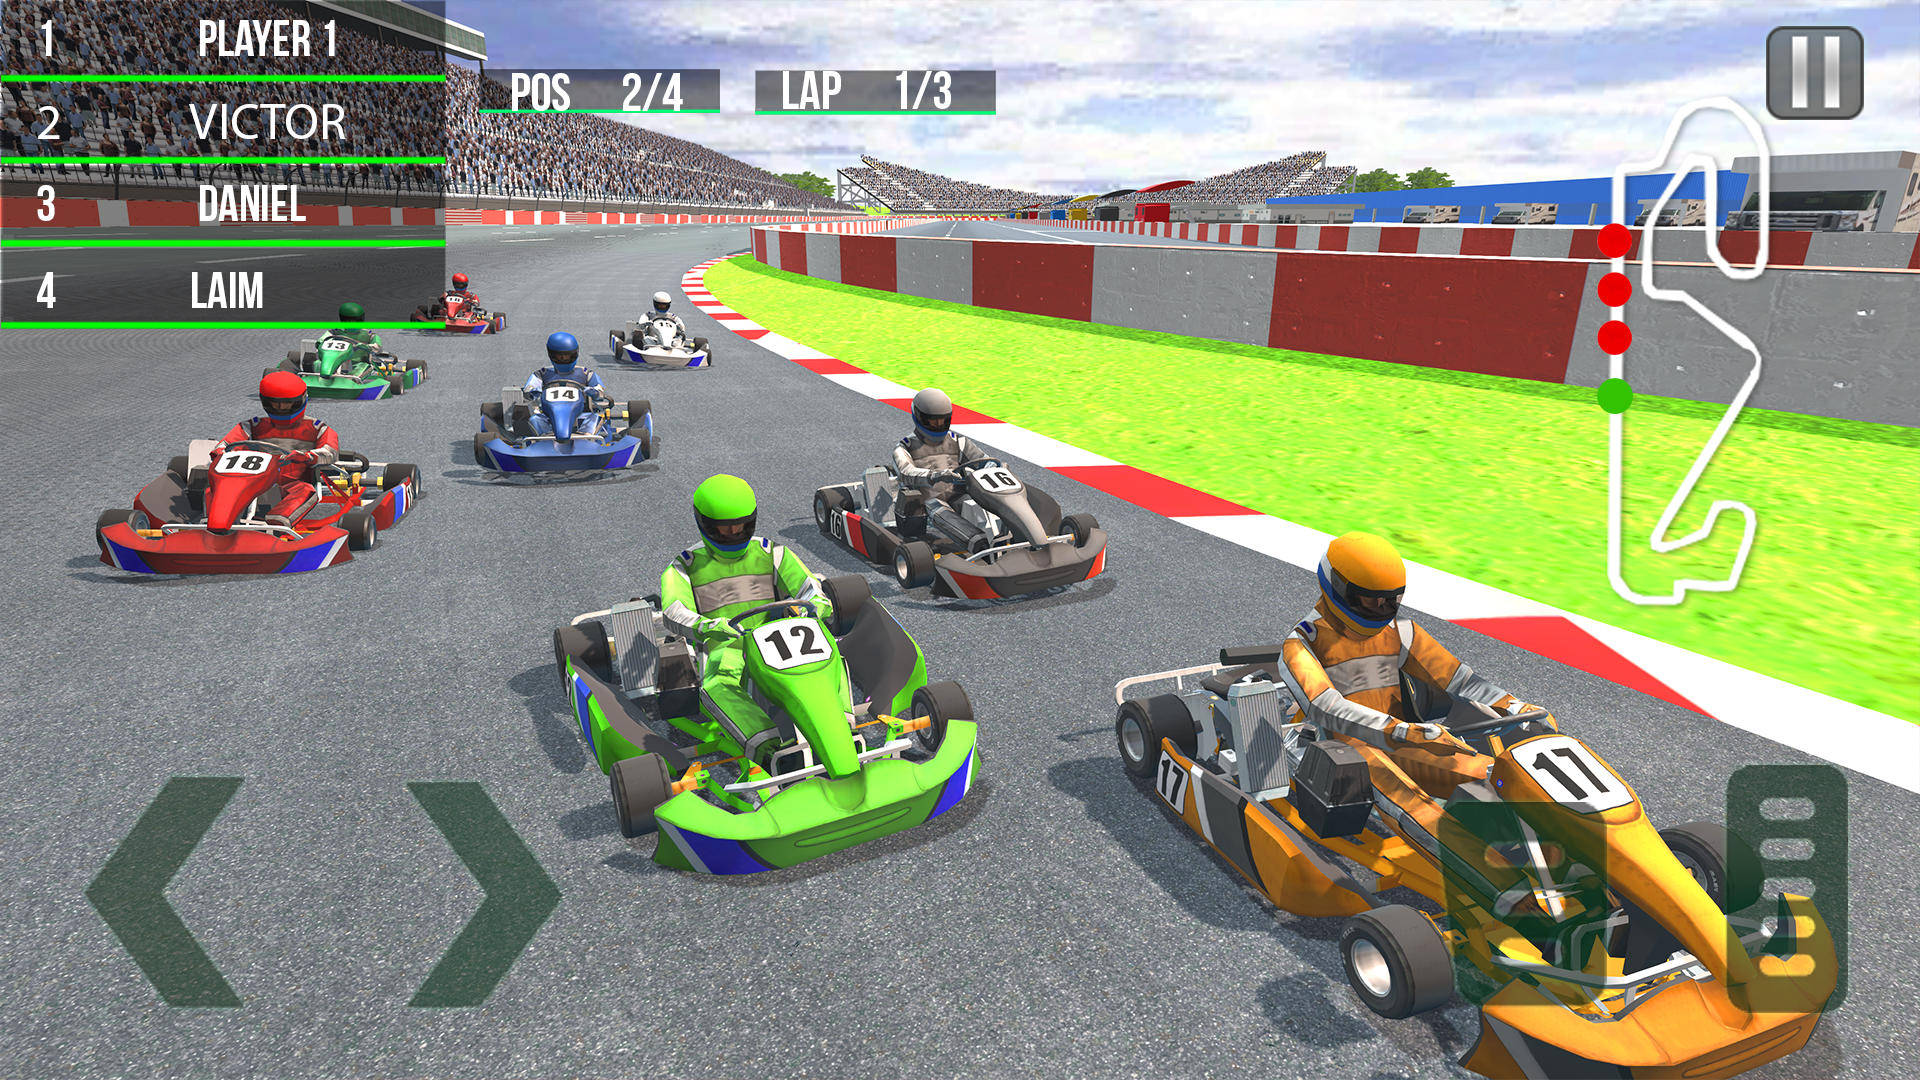 BattleKart - The best of karting and gaming